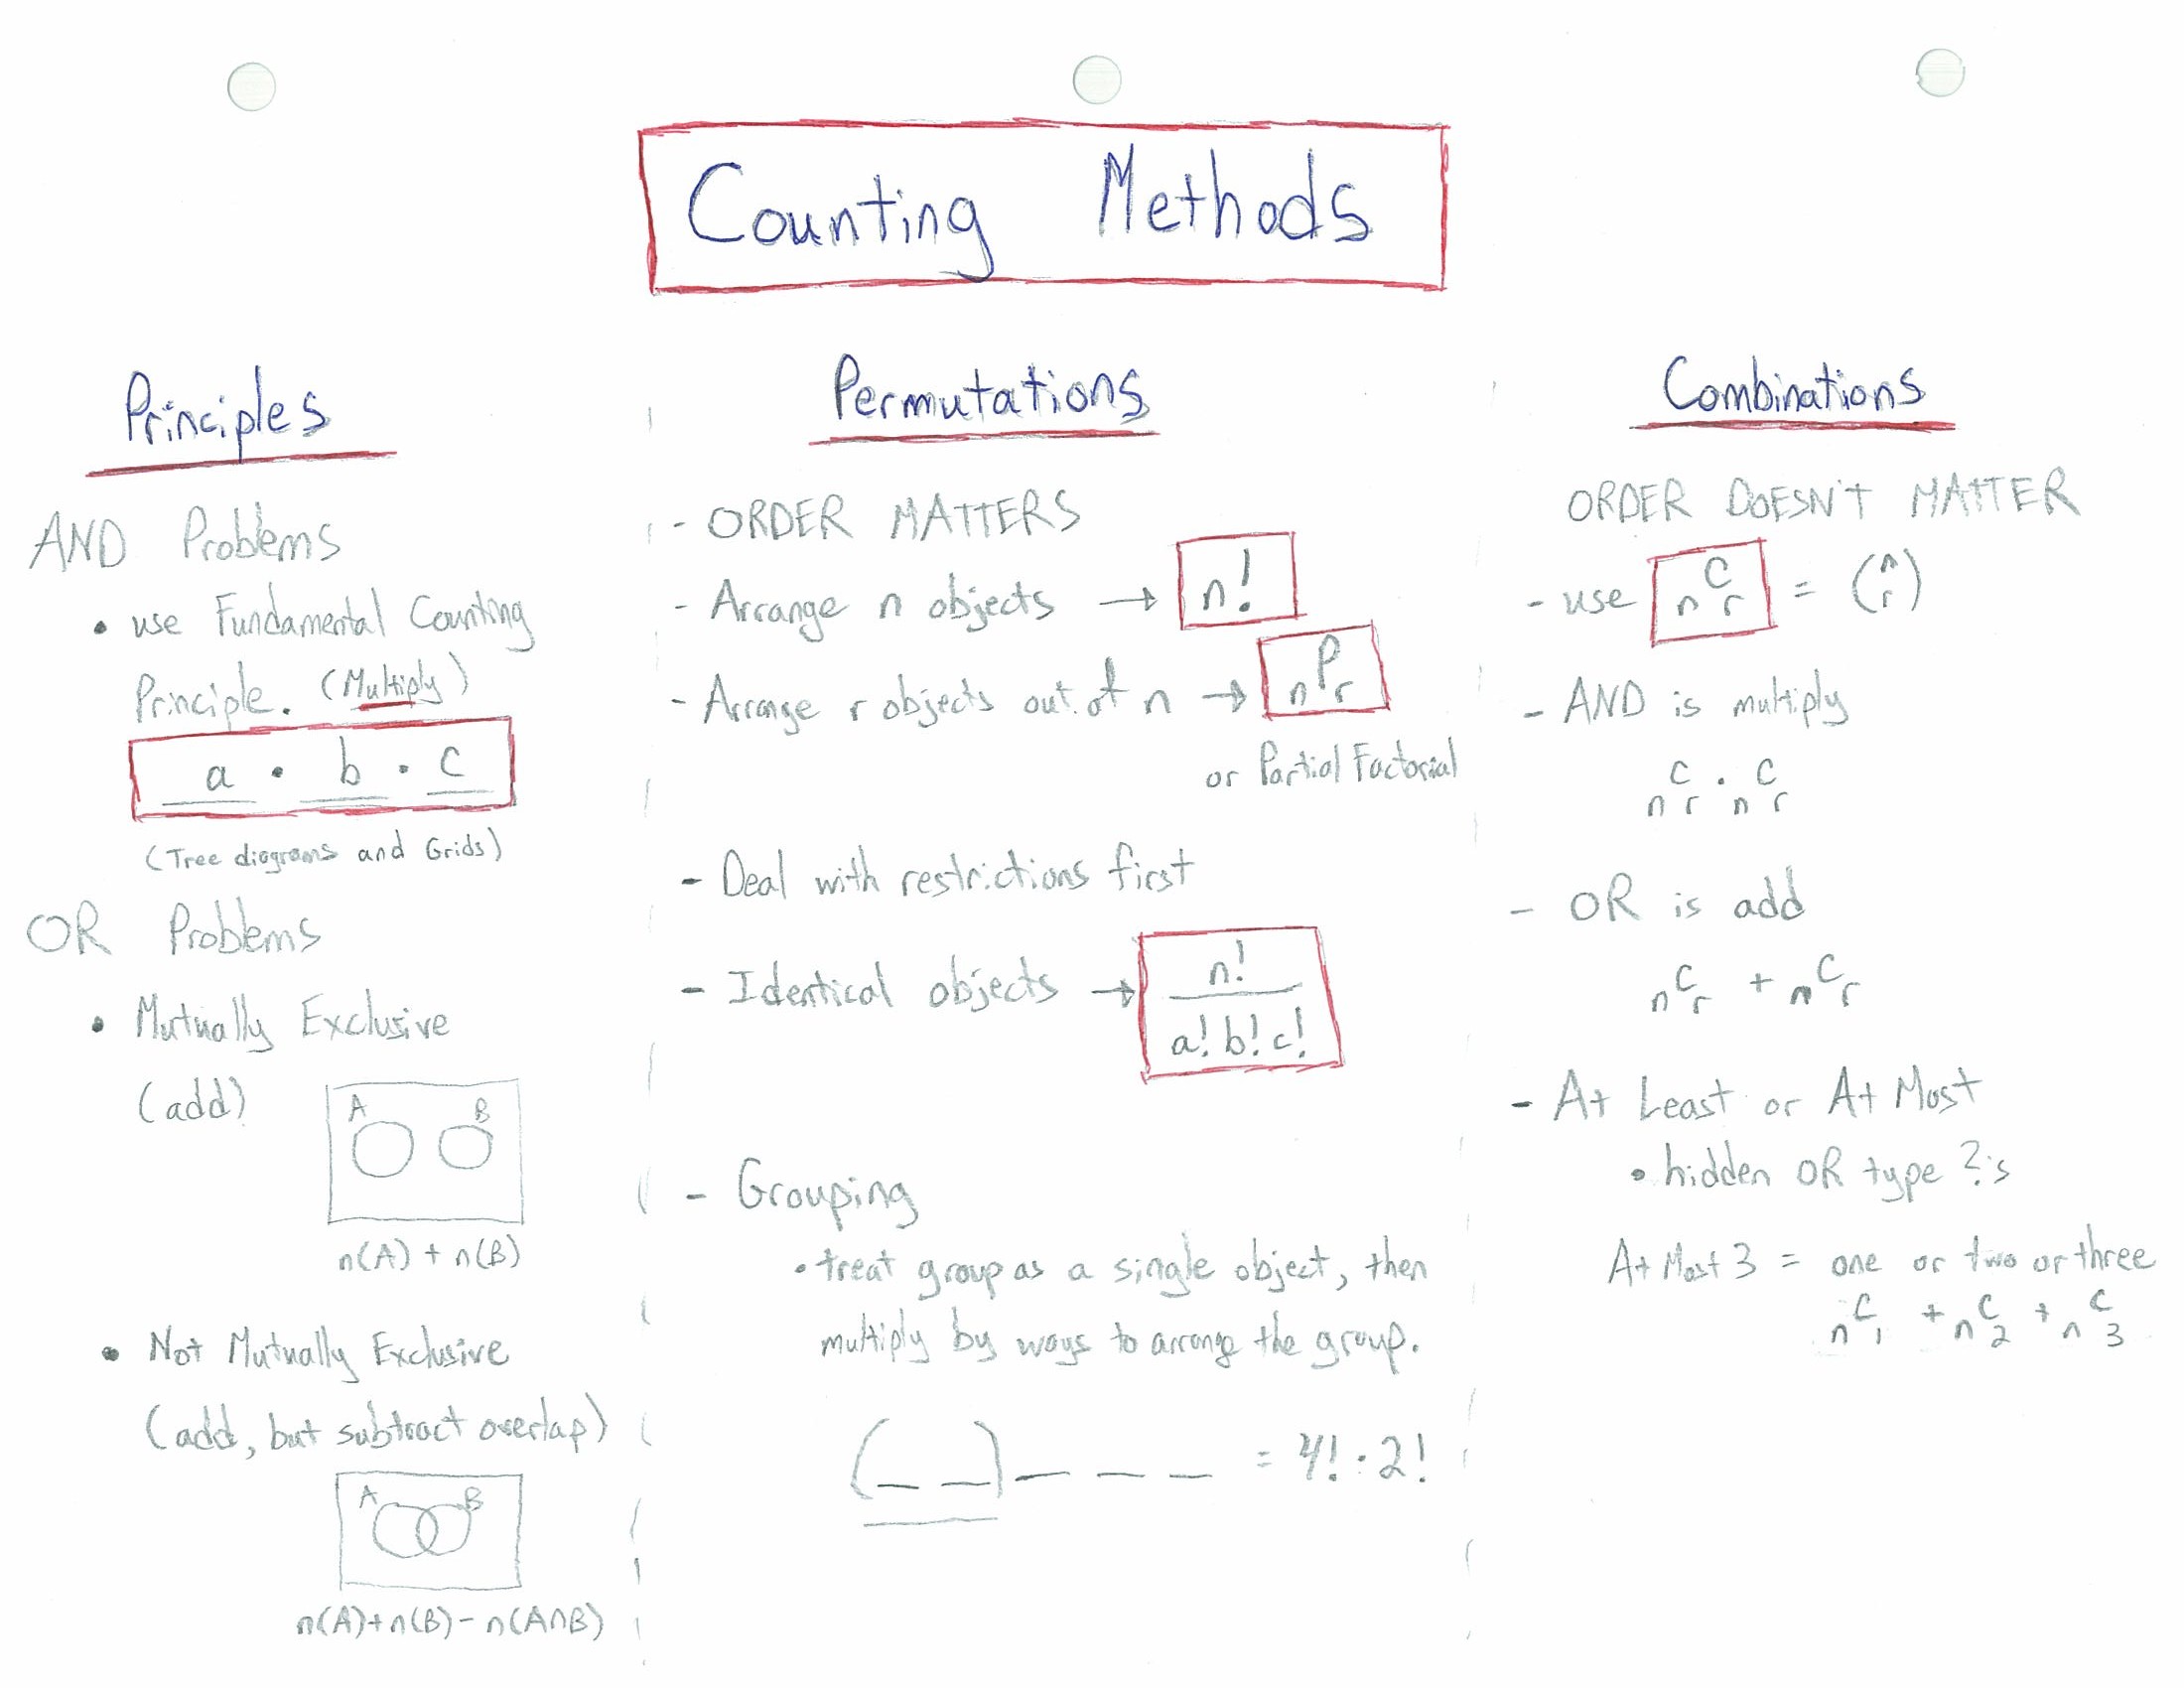 Counting Methods Concept Map